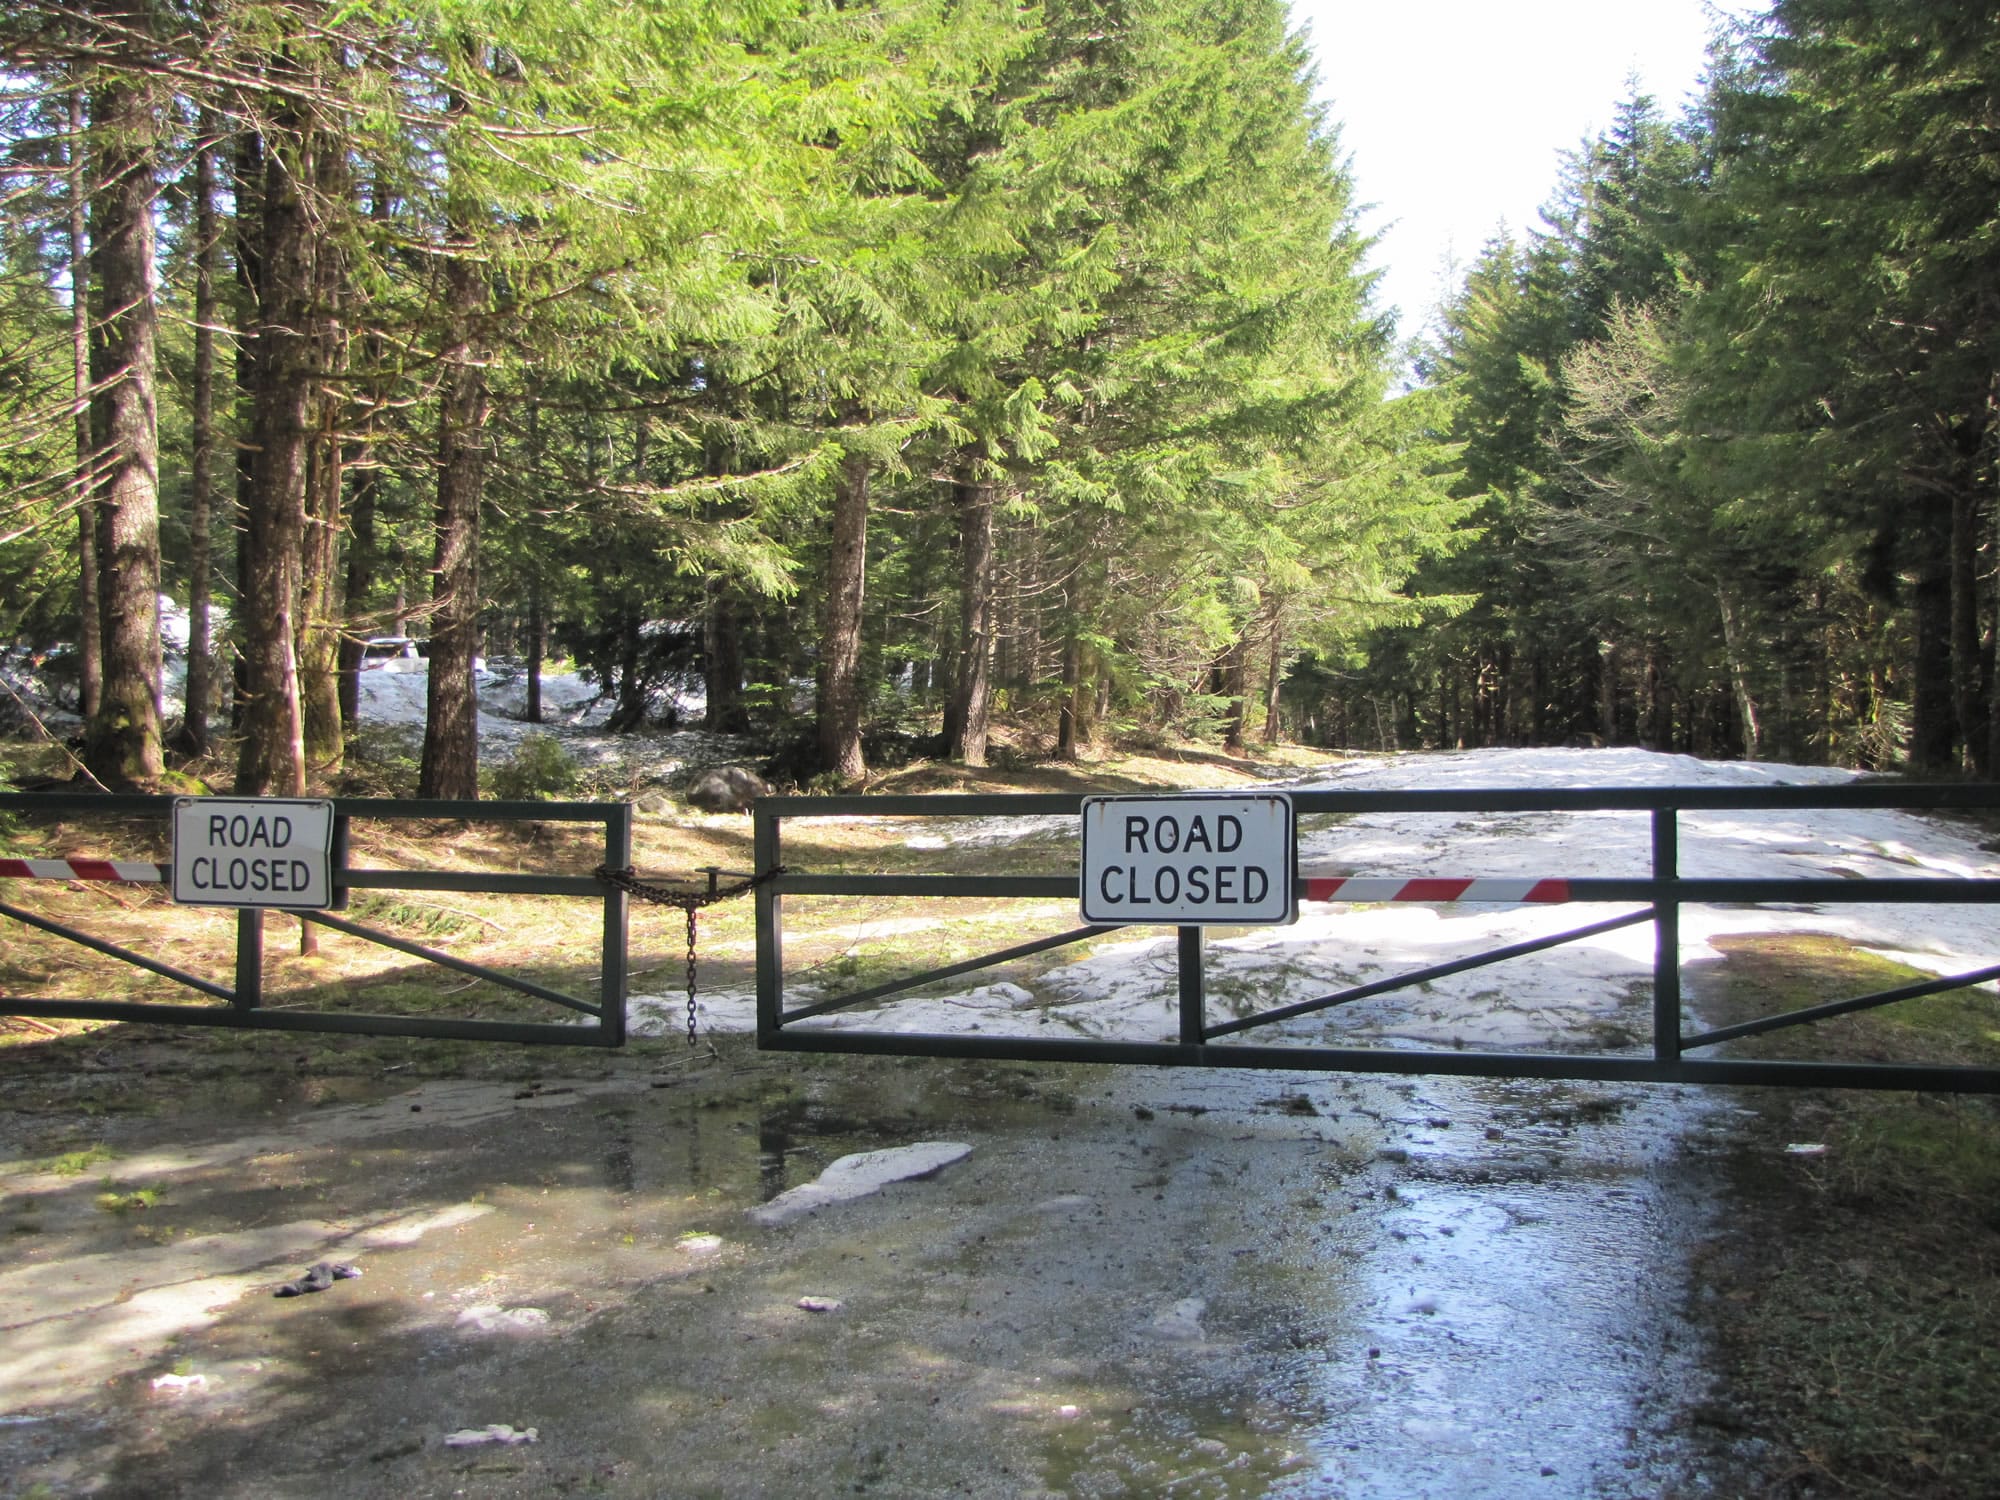 Road No. 83 is gated closed at Marble Mountain Sno-Park. The popular Lahar and Lava Canyon areas on the south side of Mount St. Helens will not be accessible for Memorial Day weekend.